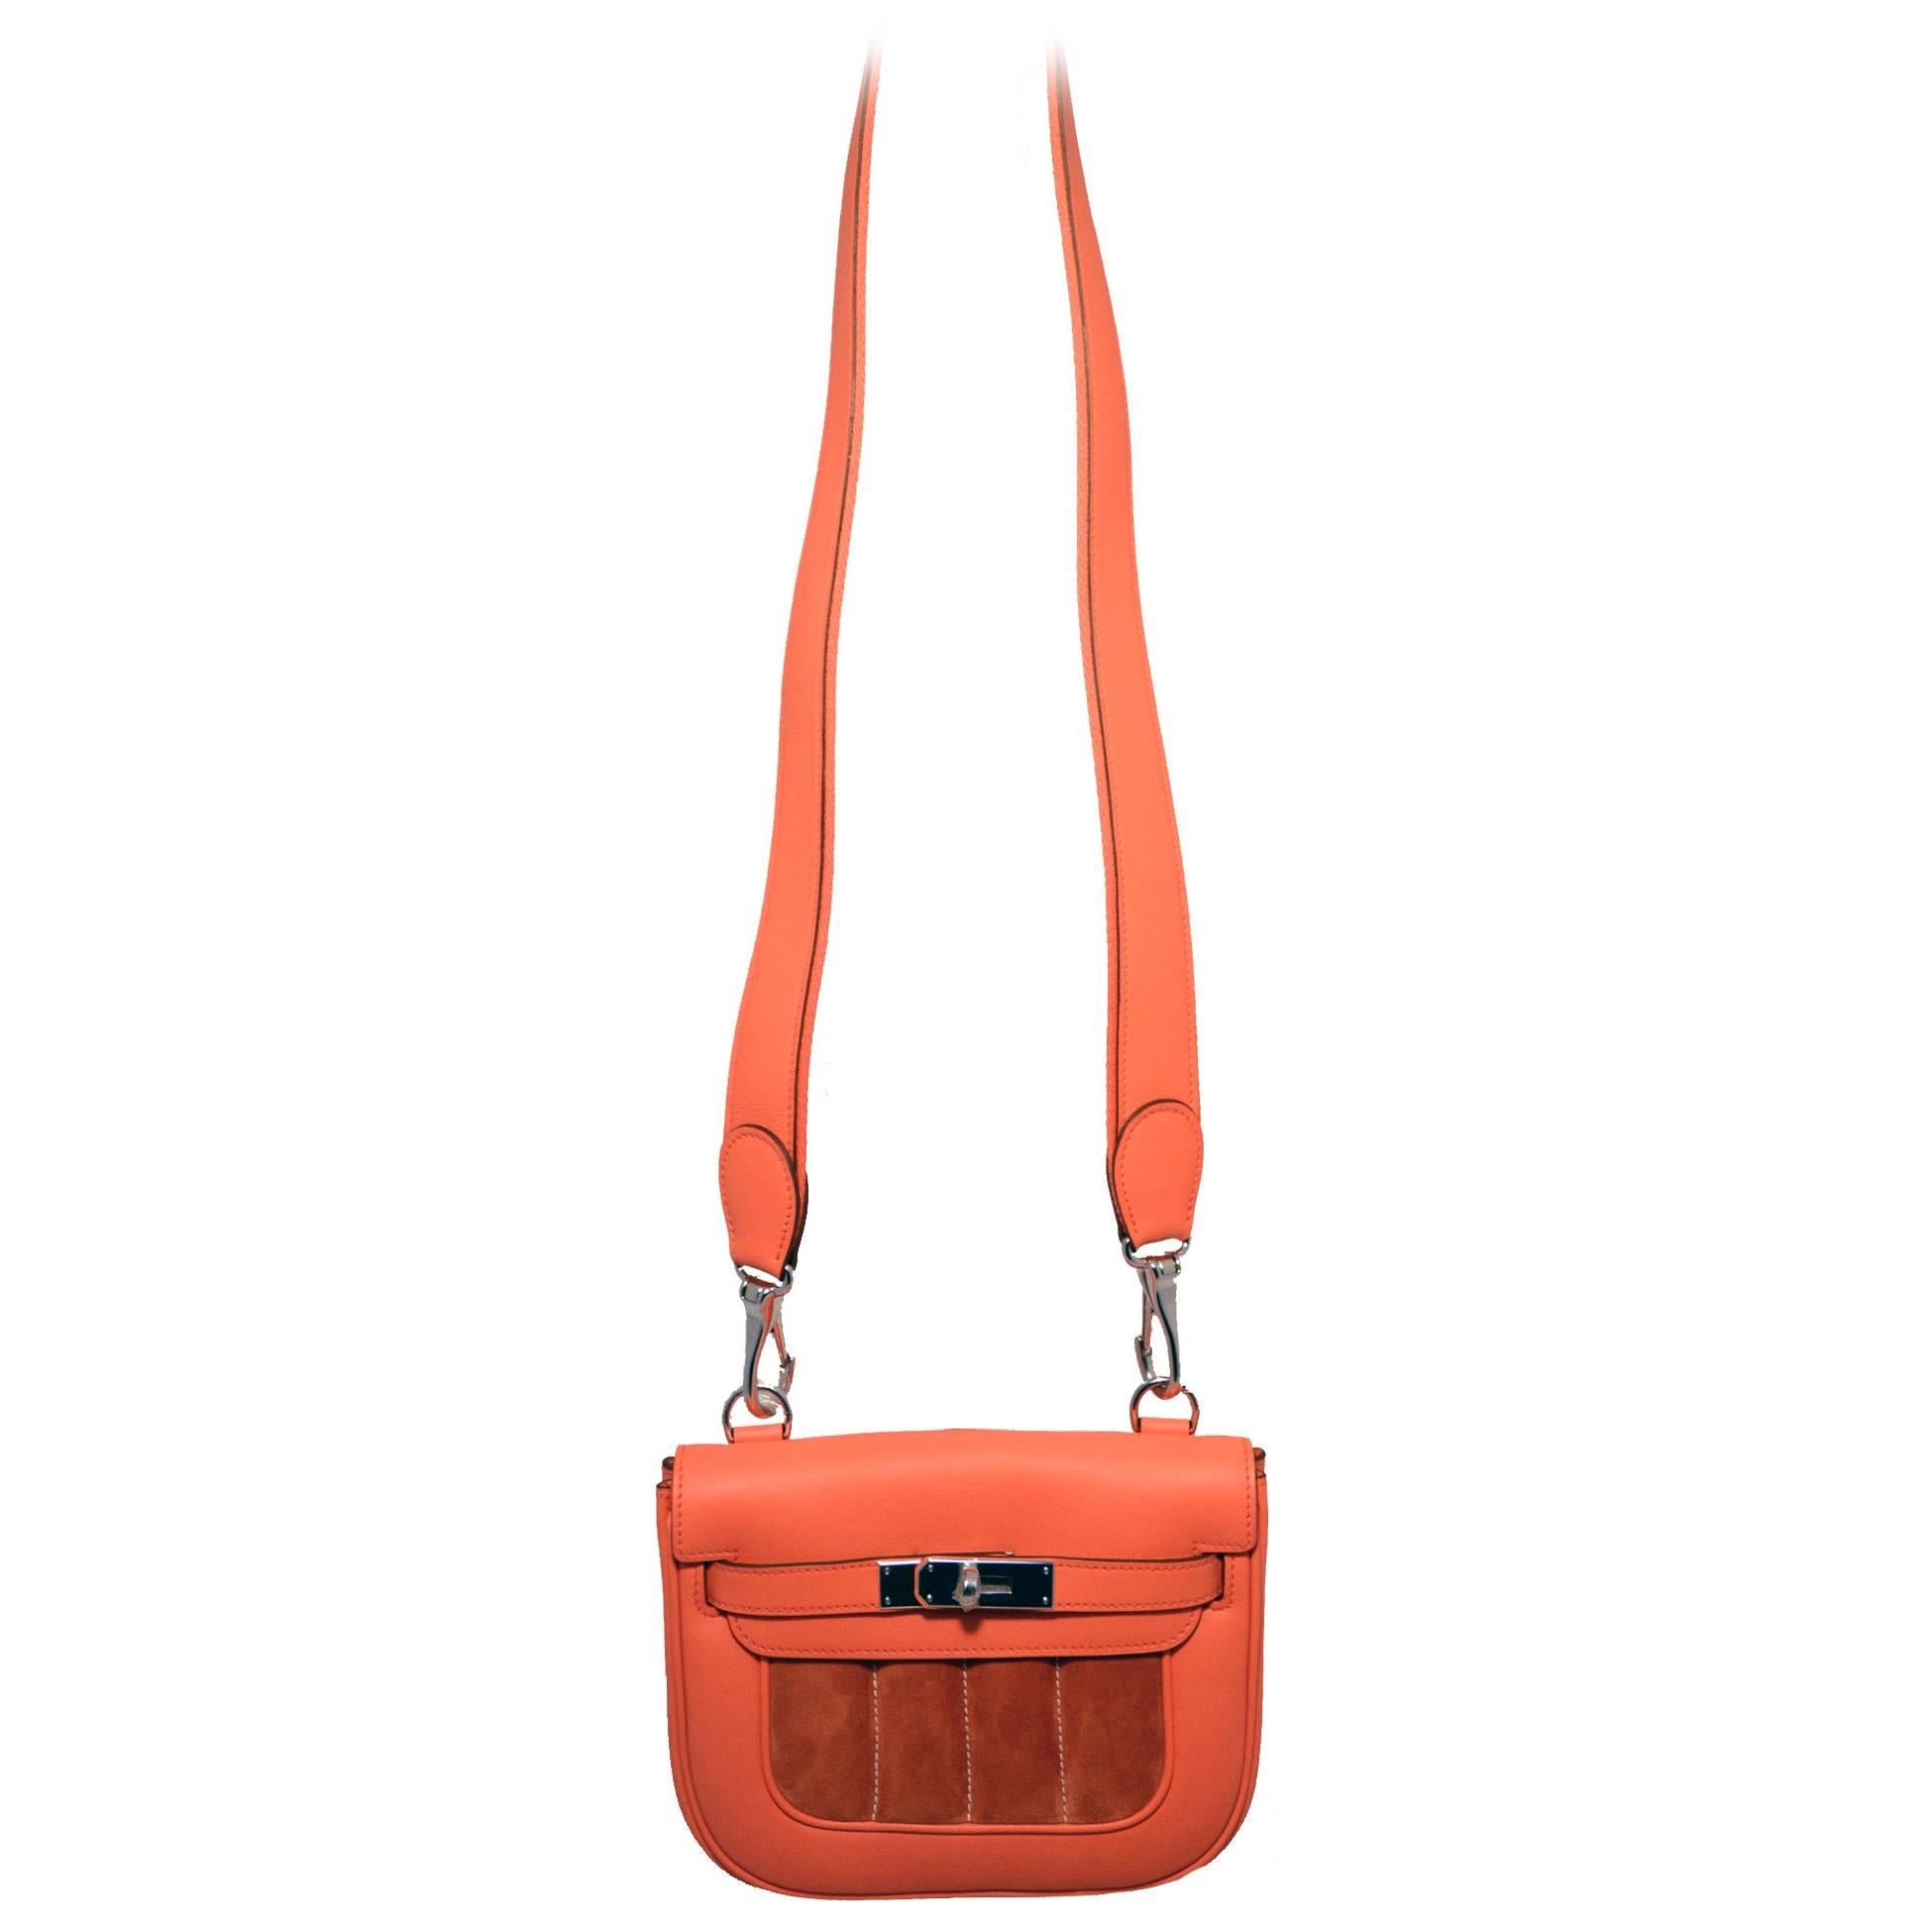 STUNNING Hermes berline bag in excellent condition.  Orange swift leather body with a darker orange suede patch along front side. Silver palladium hardware and removable long leather and canvas shoulder strap that can be worn over the shoulder or